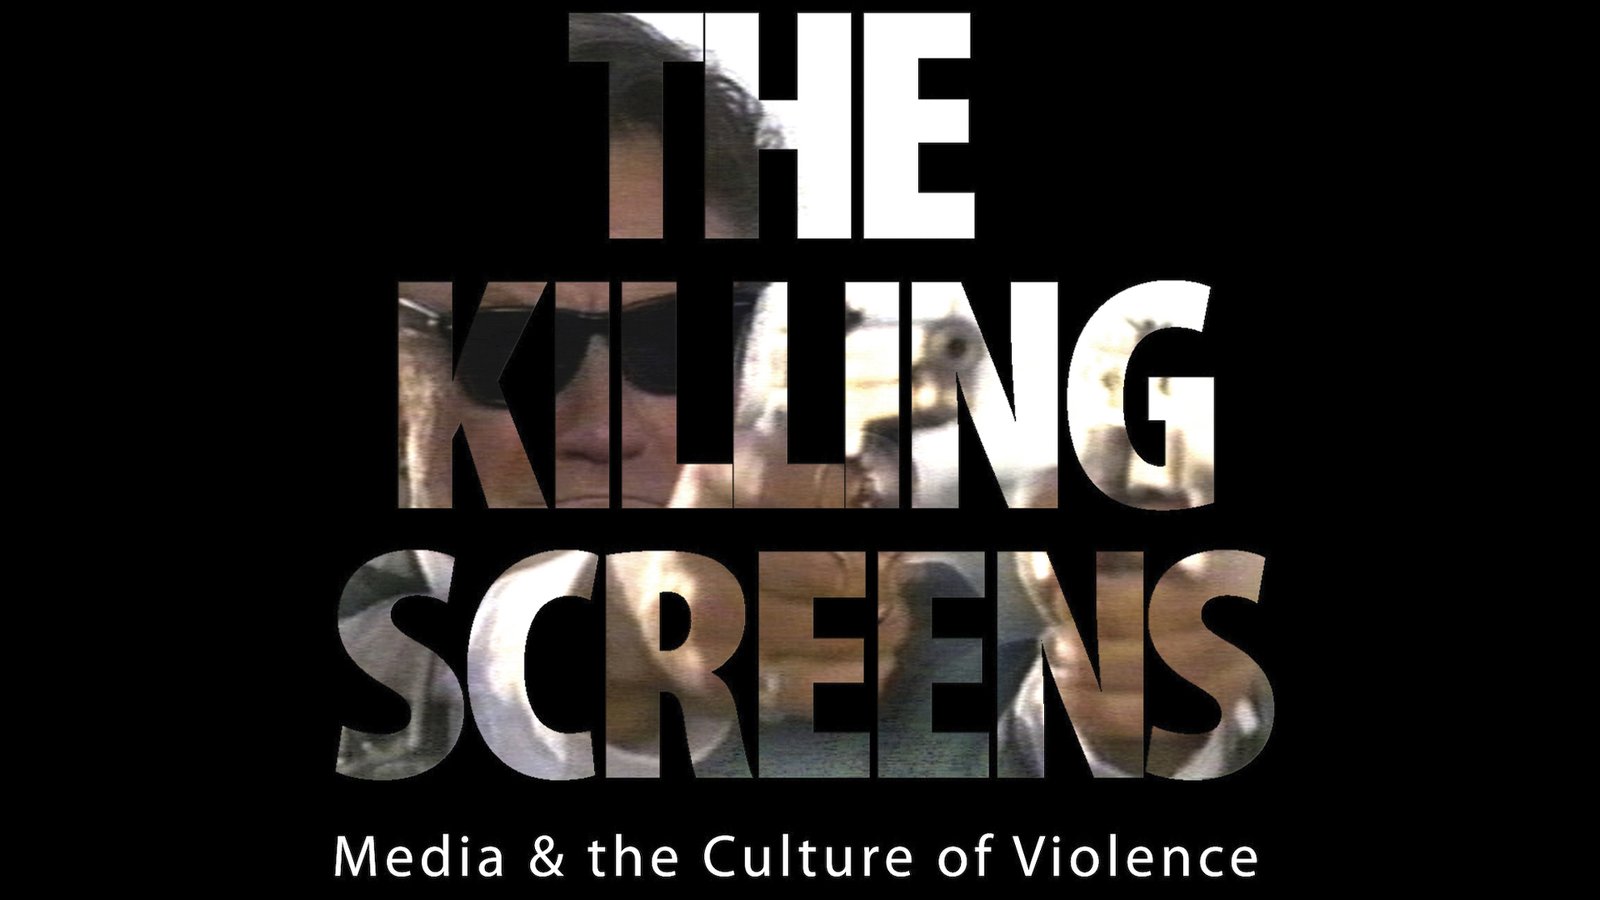 The Killing Screens - Media & the Culture of Violence